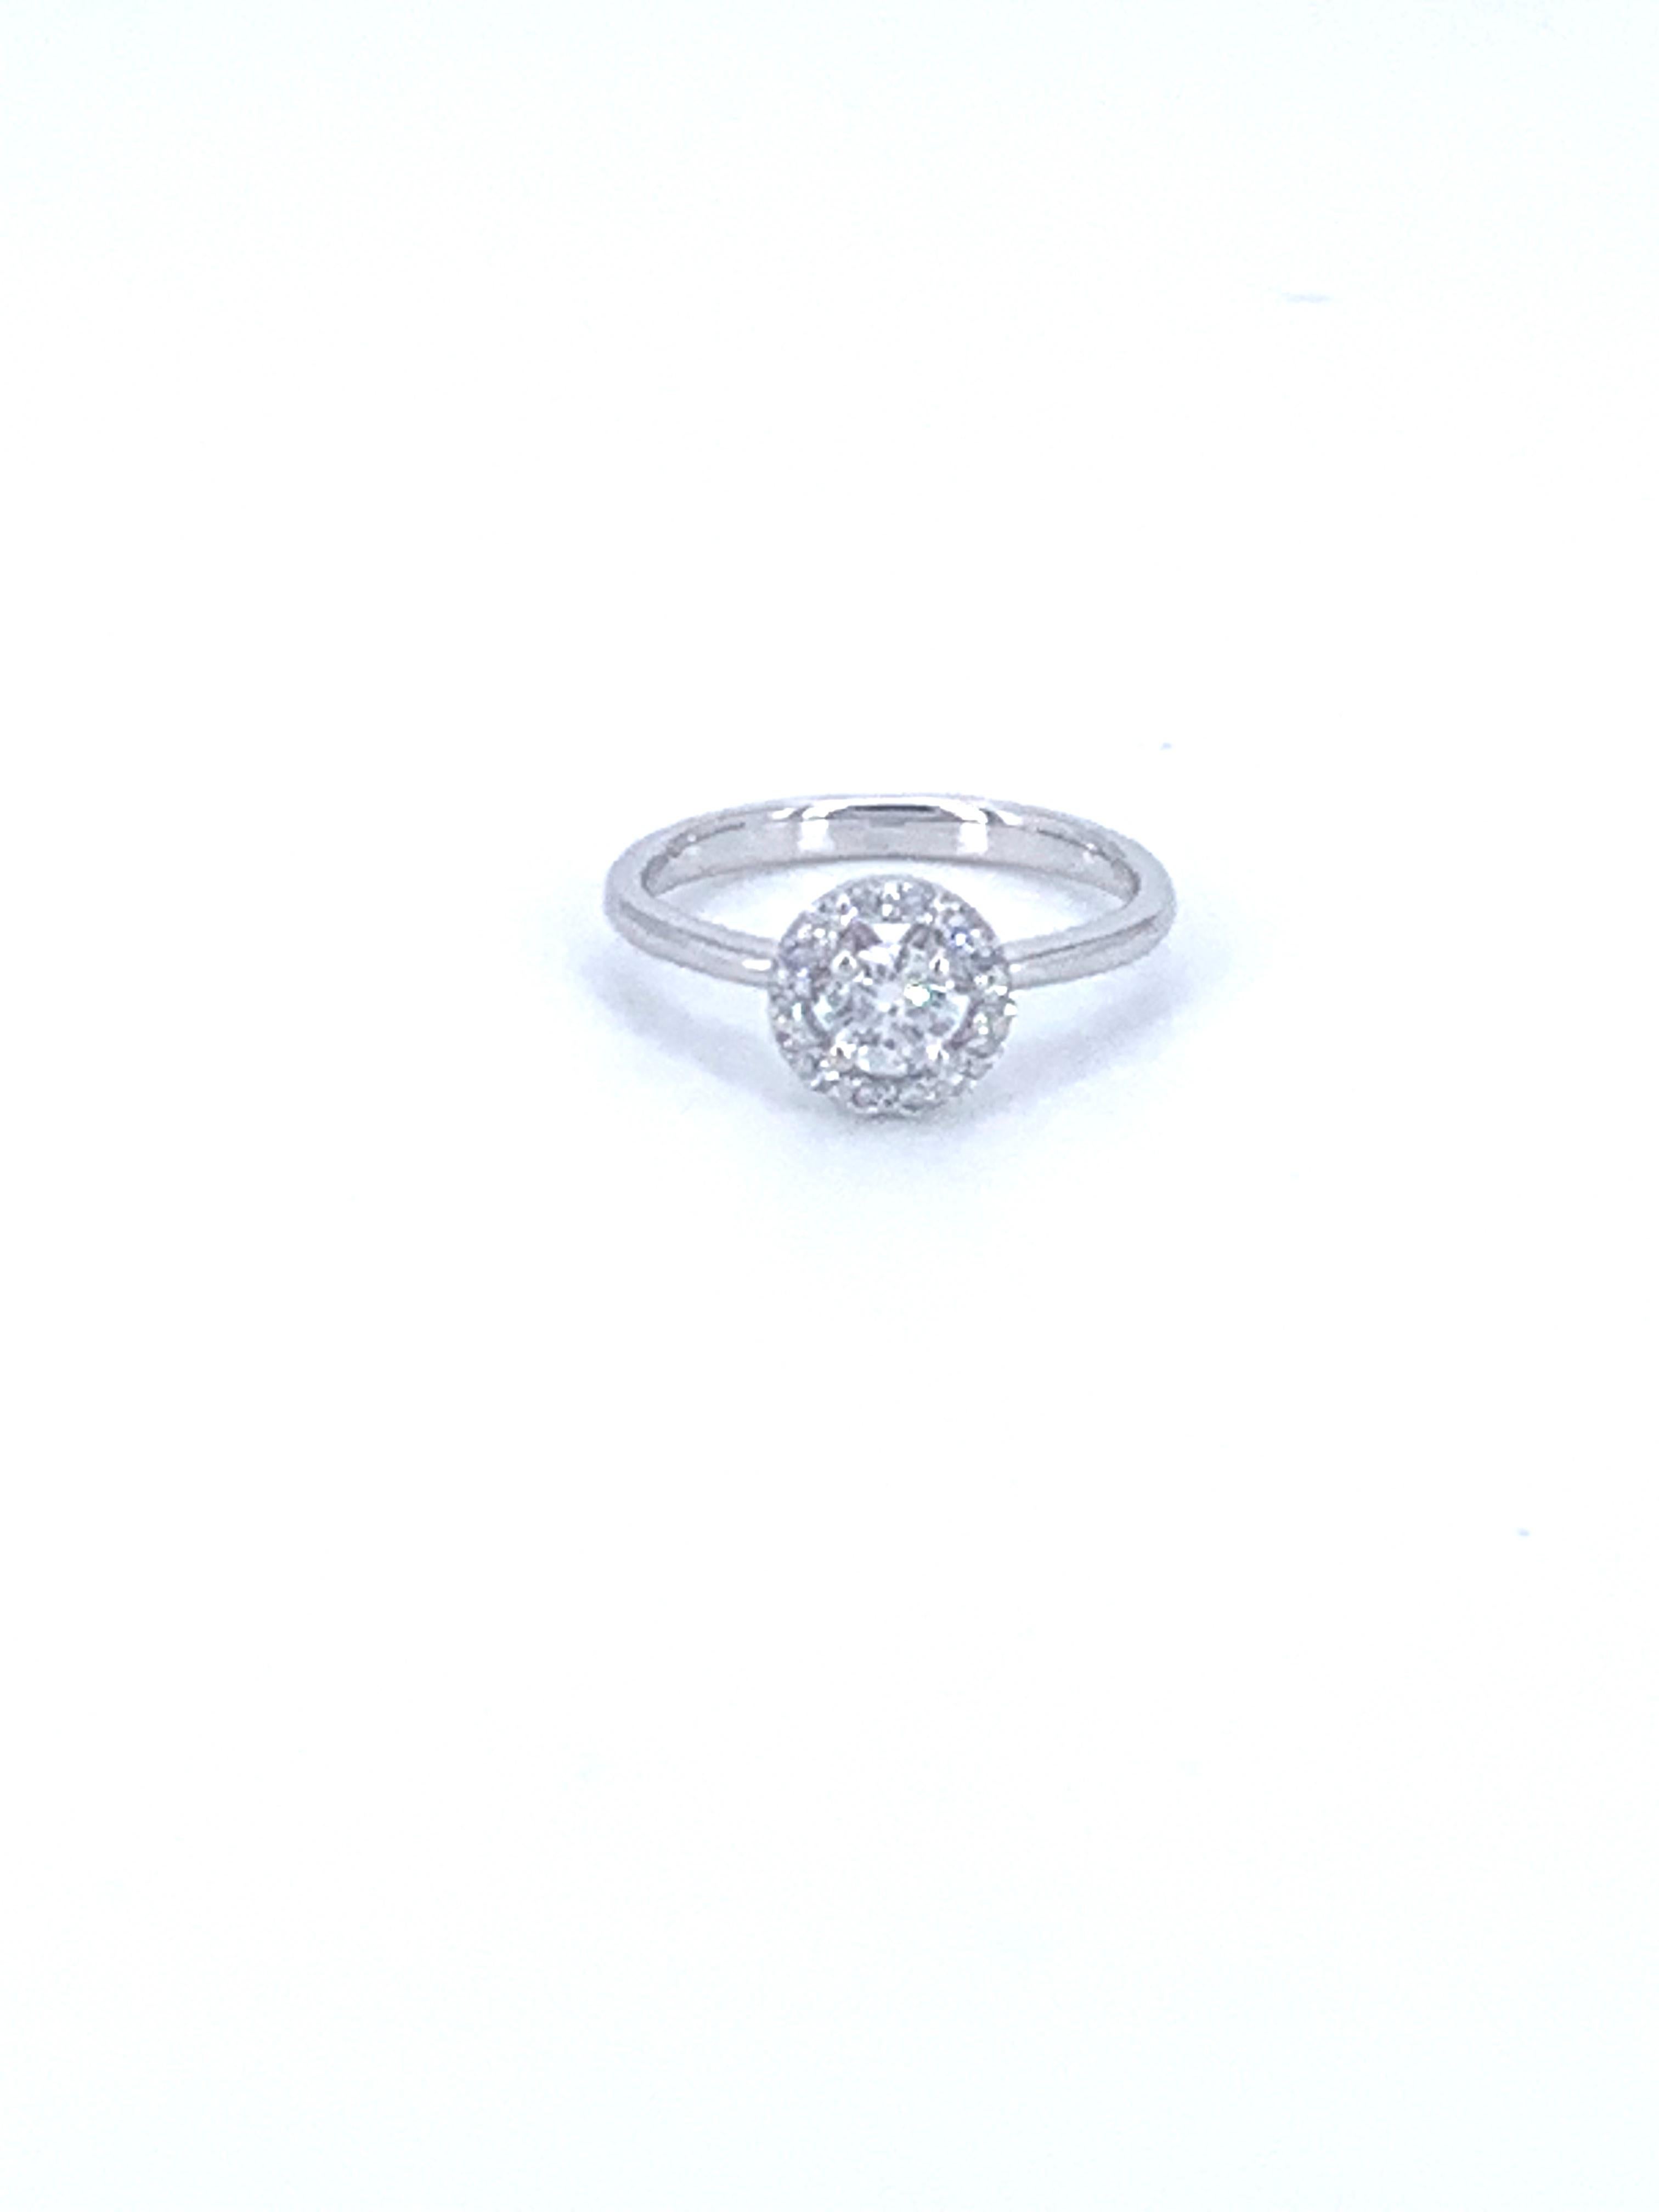 This 0.55 Carat halo solitaire diamond ring is from the Jennifer Collection and 100% made in Italy from non conflict diamonds. 
 
Set in 18Kt white Gold, the ring radiates brightness and beauty from the finger.

Crafted so the centre diamond is the